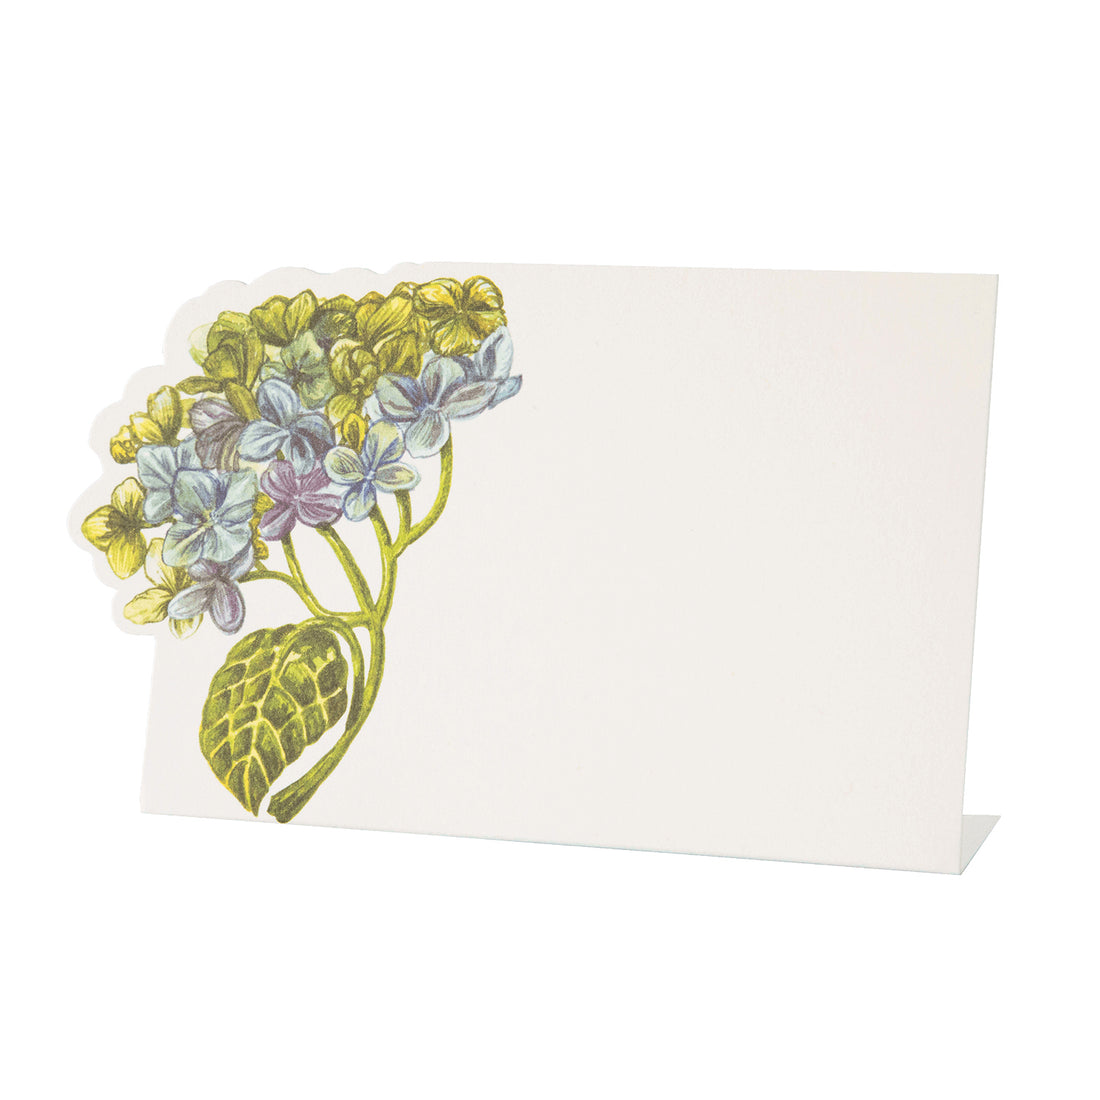 Hester &amp; Cook Hydrangea place cards are an elegant addition to any event. These unique place cards feature multicolored blooms, adding a touch of natural beauty to your table setting.